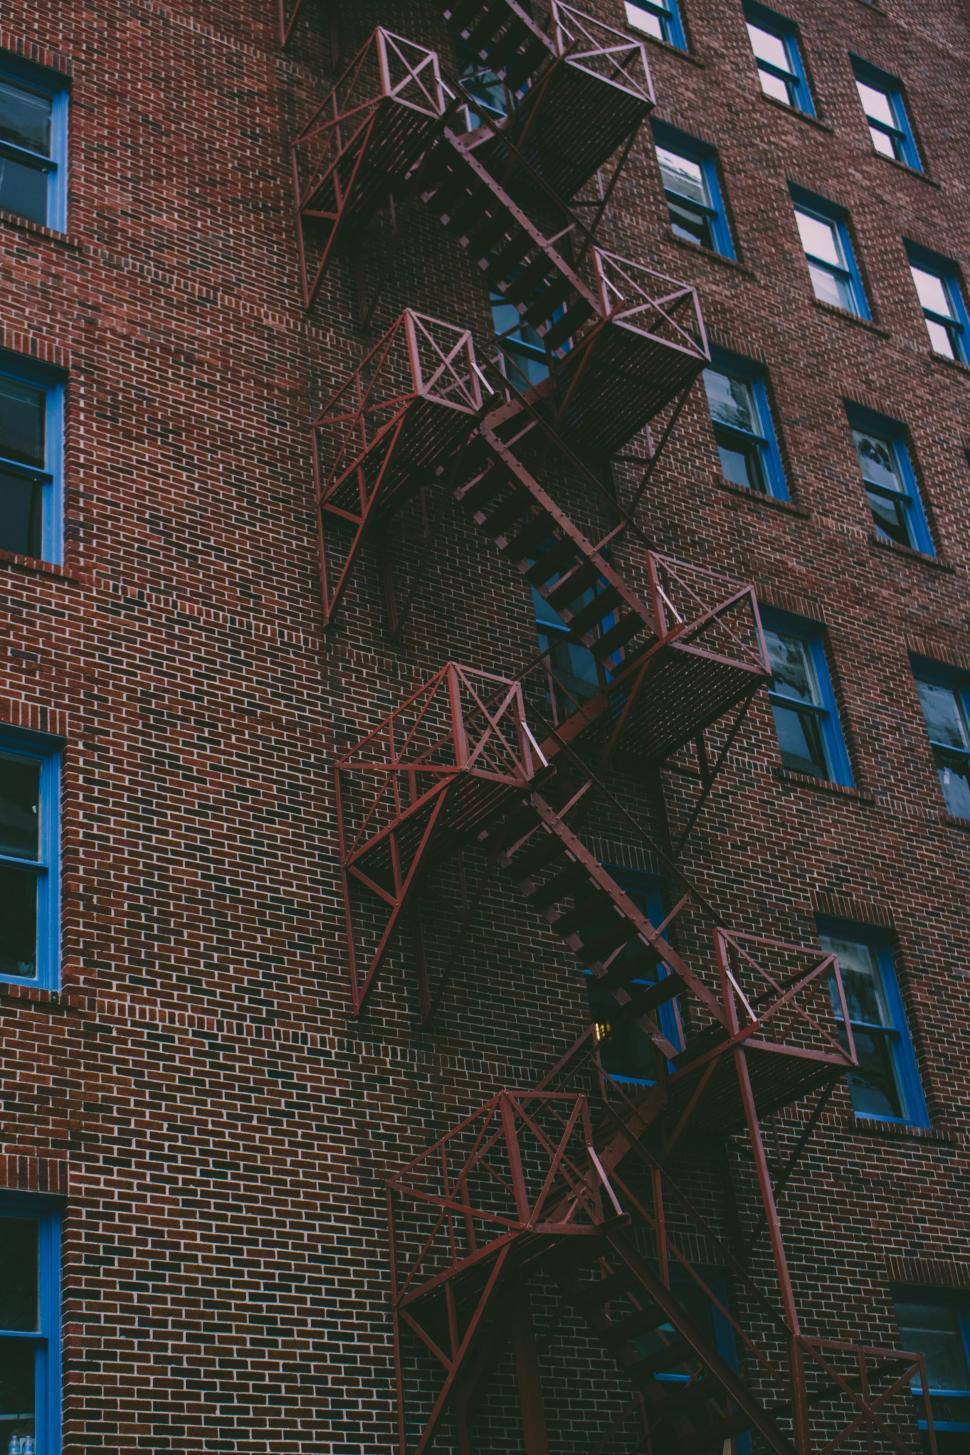 Free Image of Fire Escape on the Side of a Brick Building 